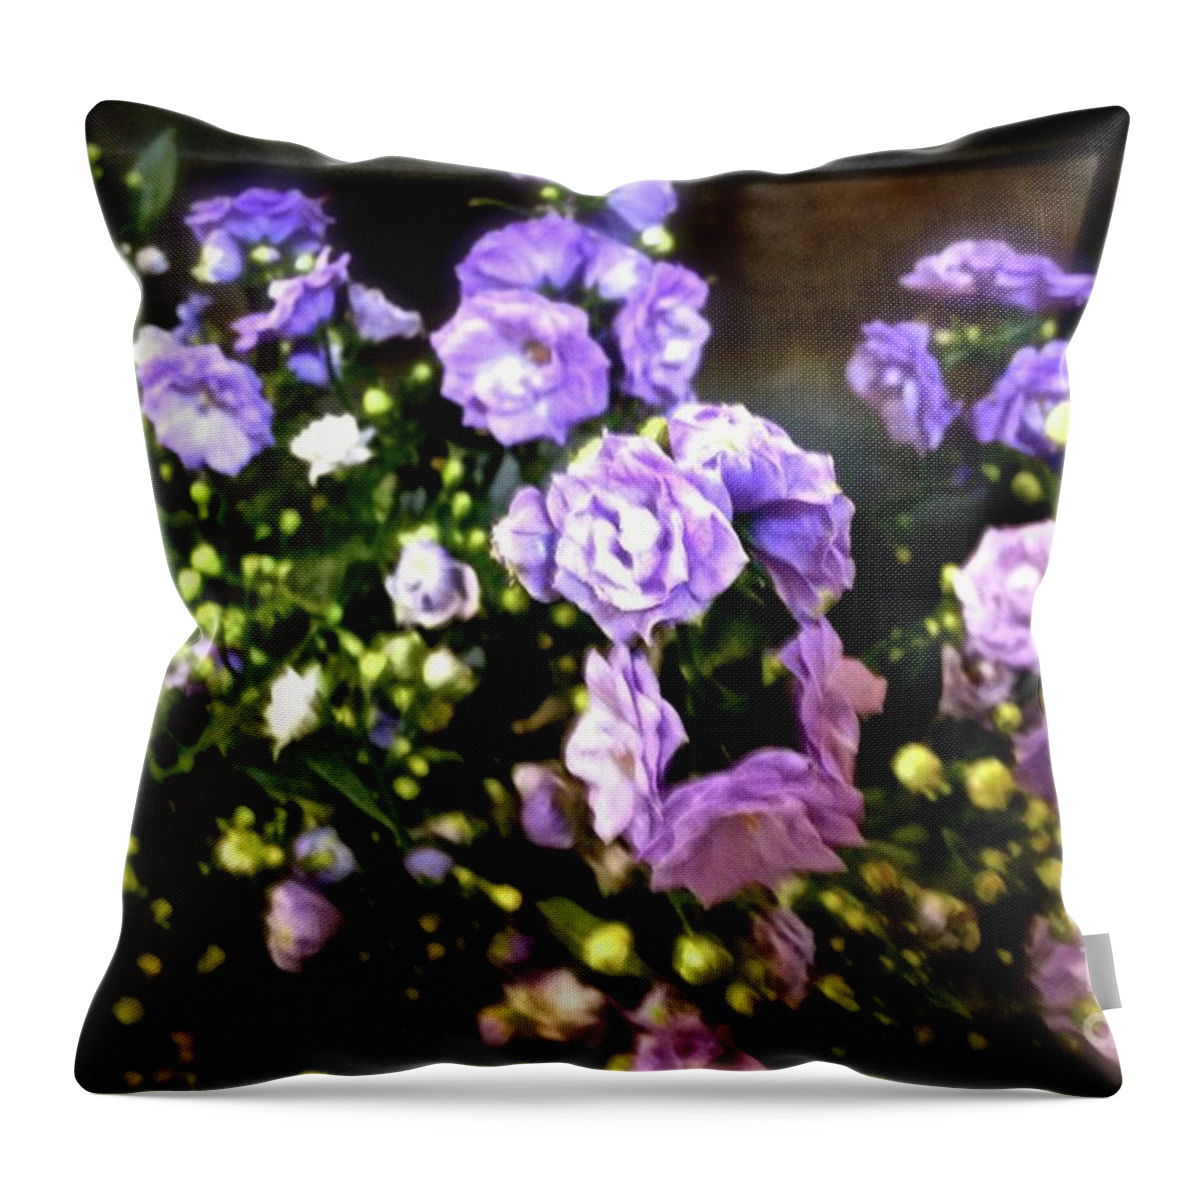 Violet Throw Pillow featuring the photograph Purple Pretties by Beth Saffer